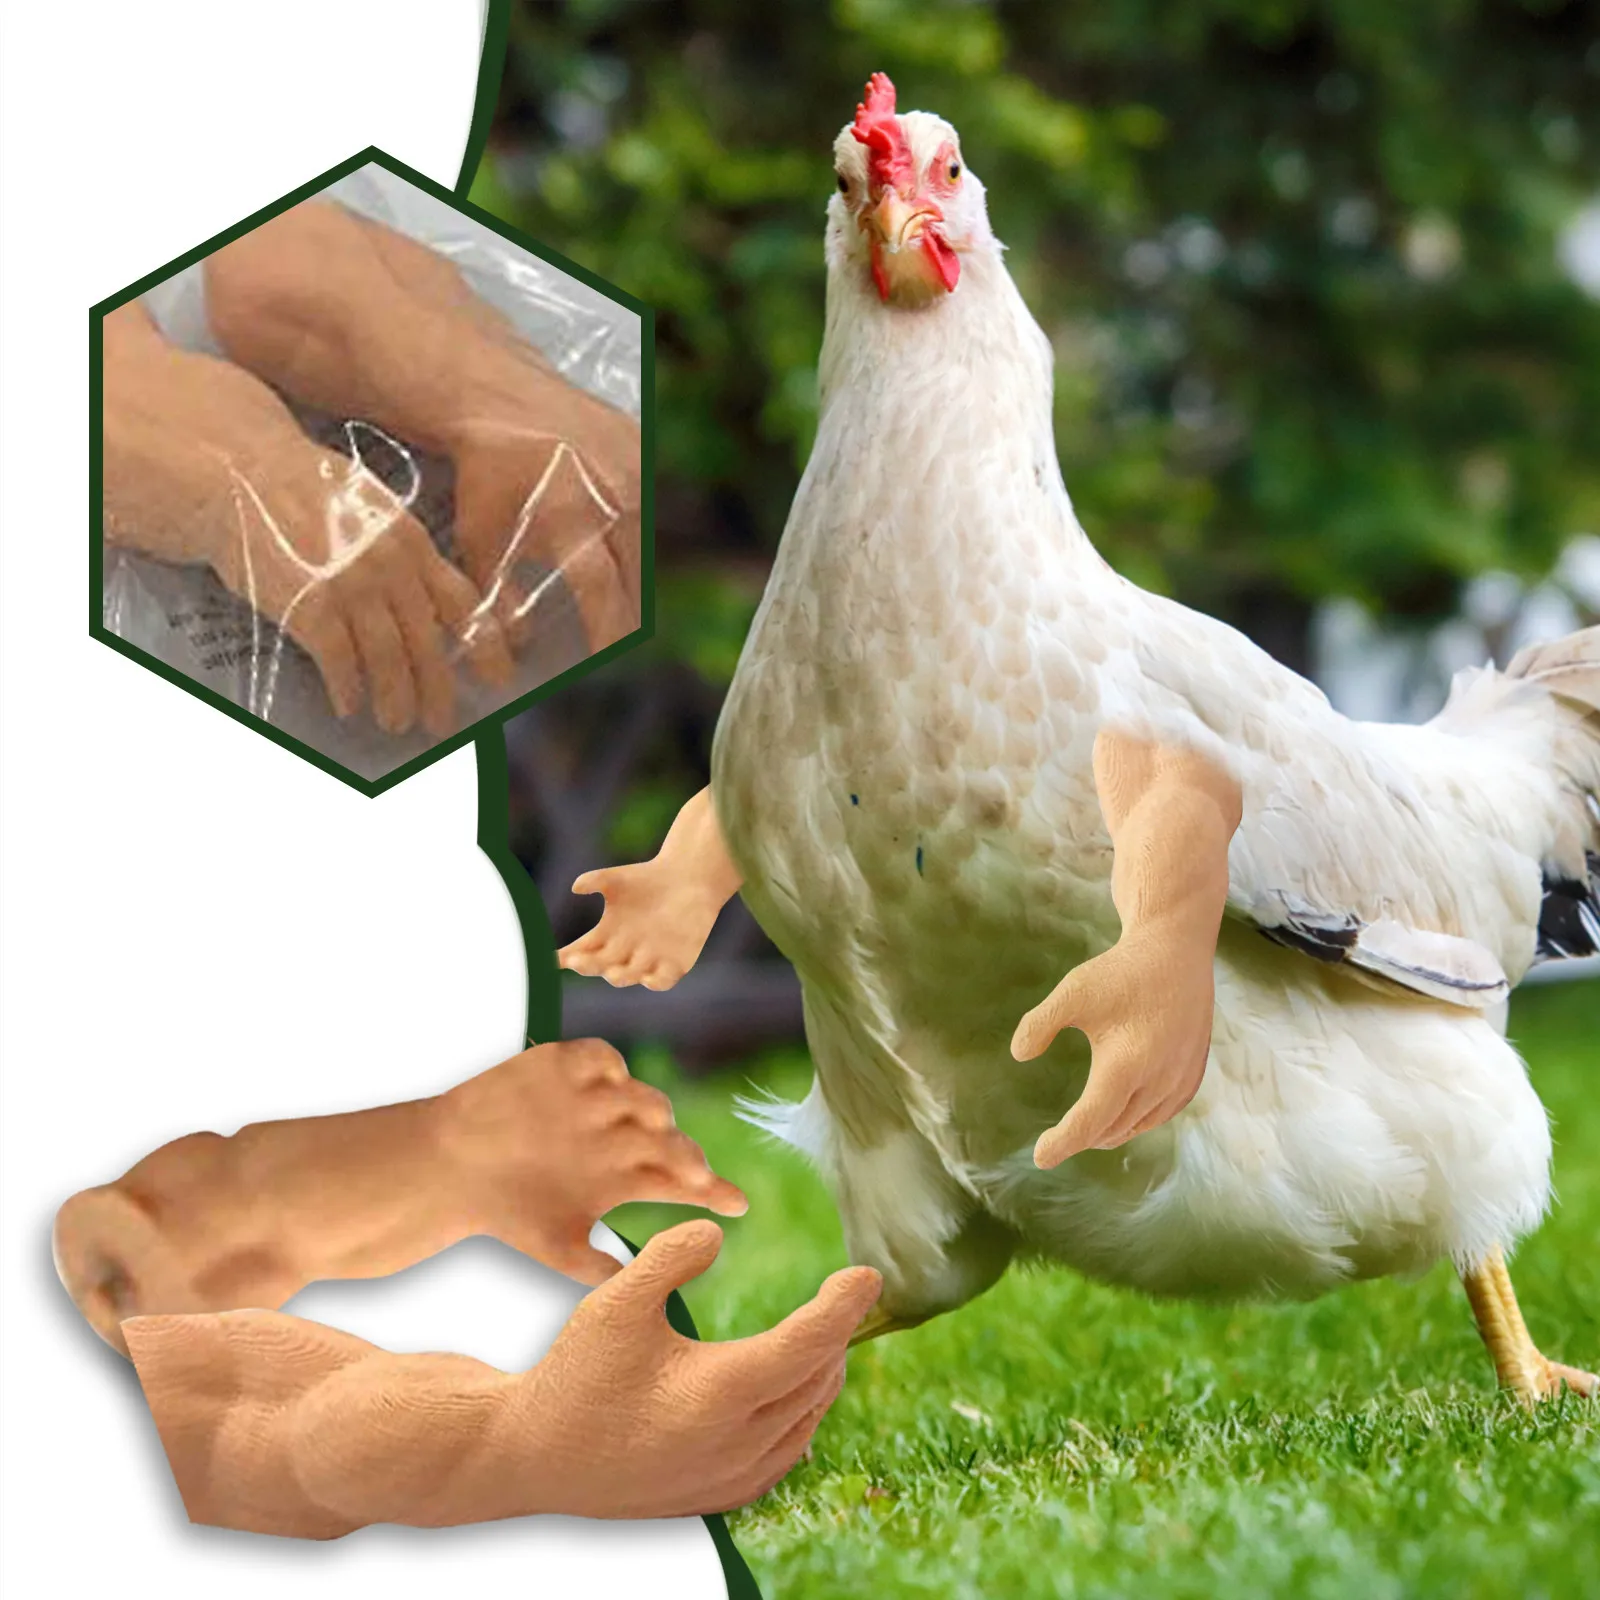 Chicken Arm Toy Gag Gift Chicken Arms Props Chicken Forelimb Decoration  Spoof For Pet Themed Party Farm Animal Supplies Hot - AliExpress